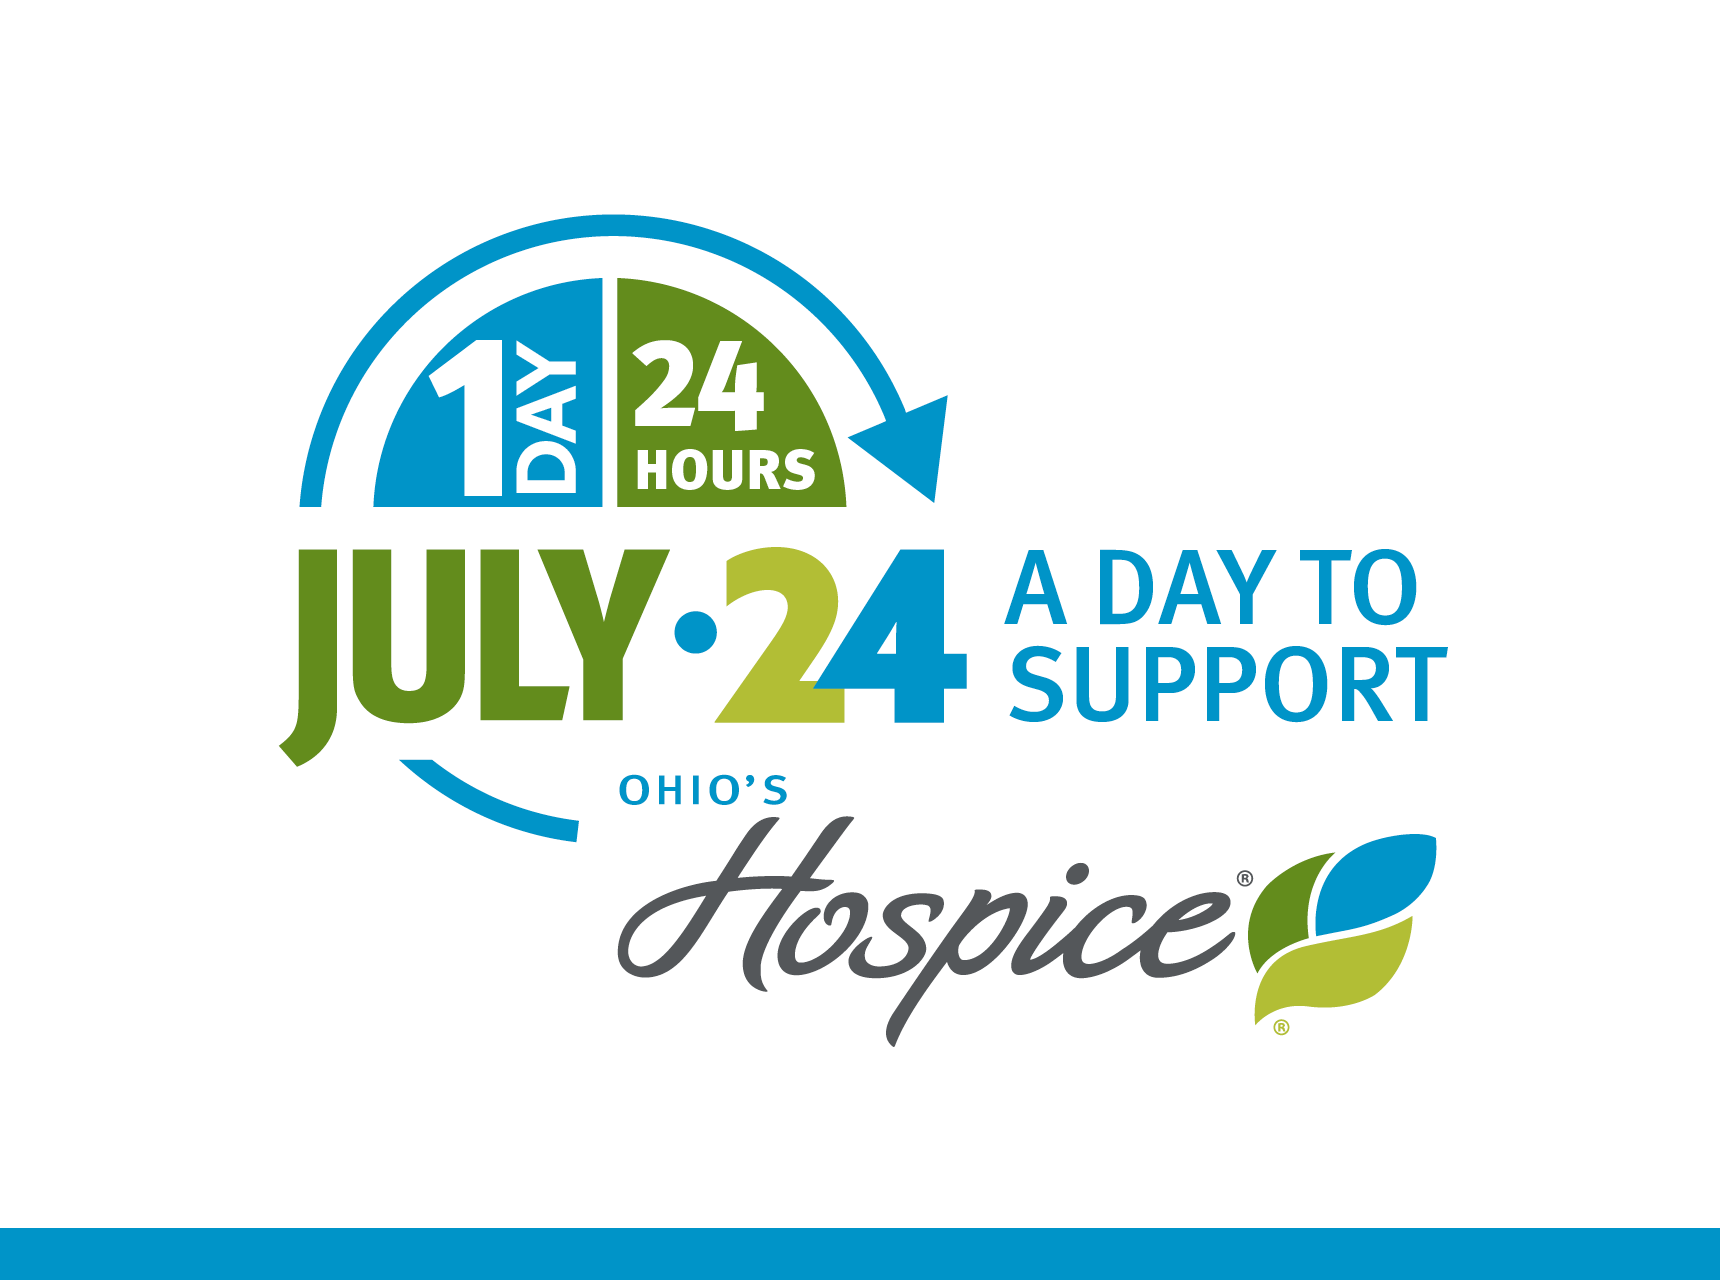 July 24. One day. Twenty-four hours. Join in A DAY TO SUPPORT our mission! Ohio's Hospice.